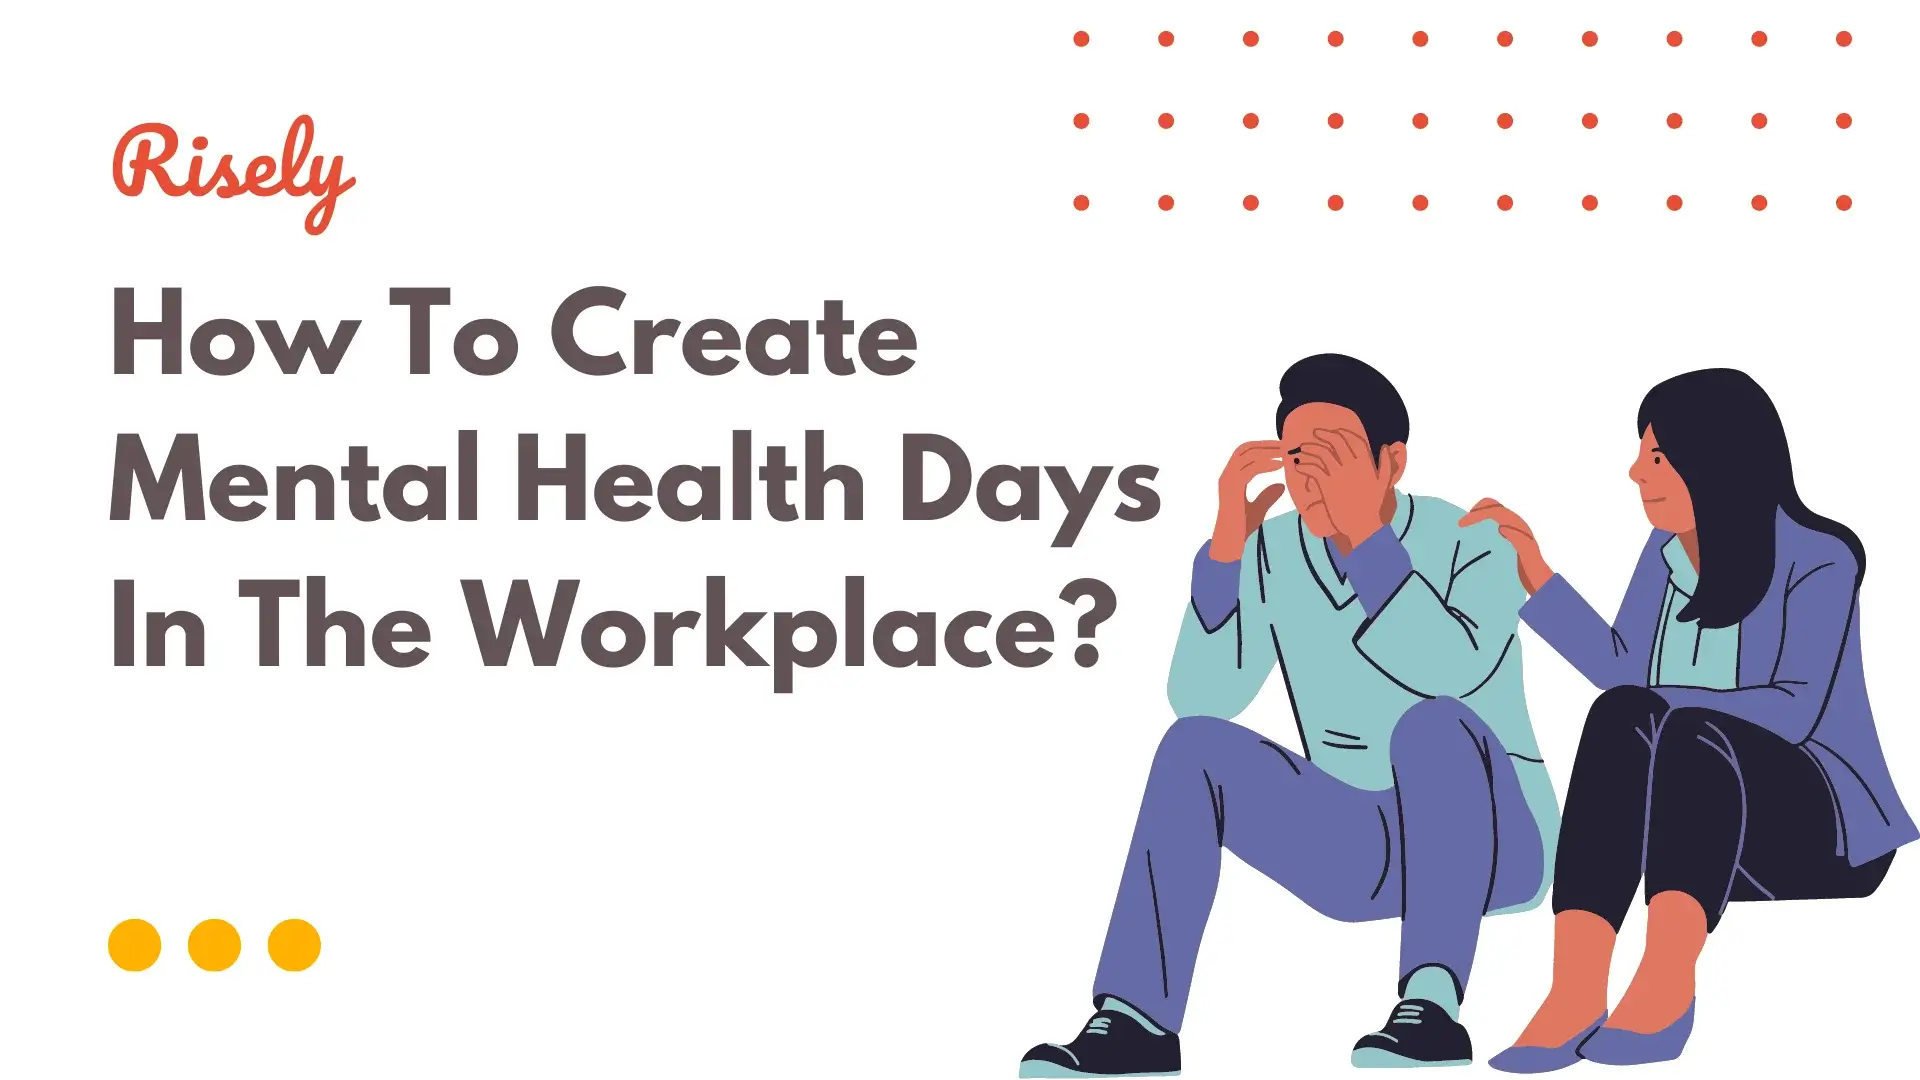 How To Create Mental Health Days In The Workplace